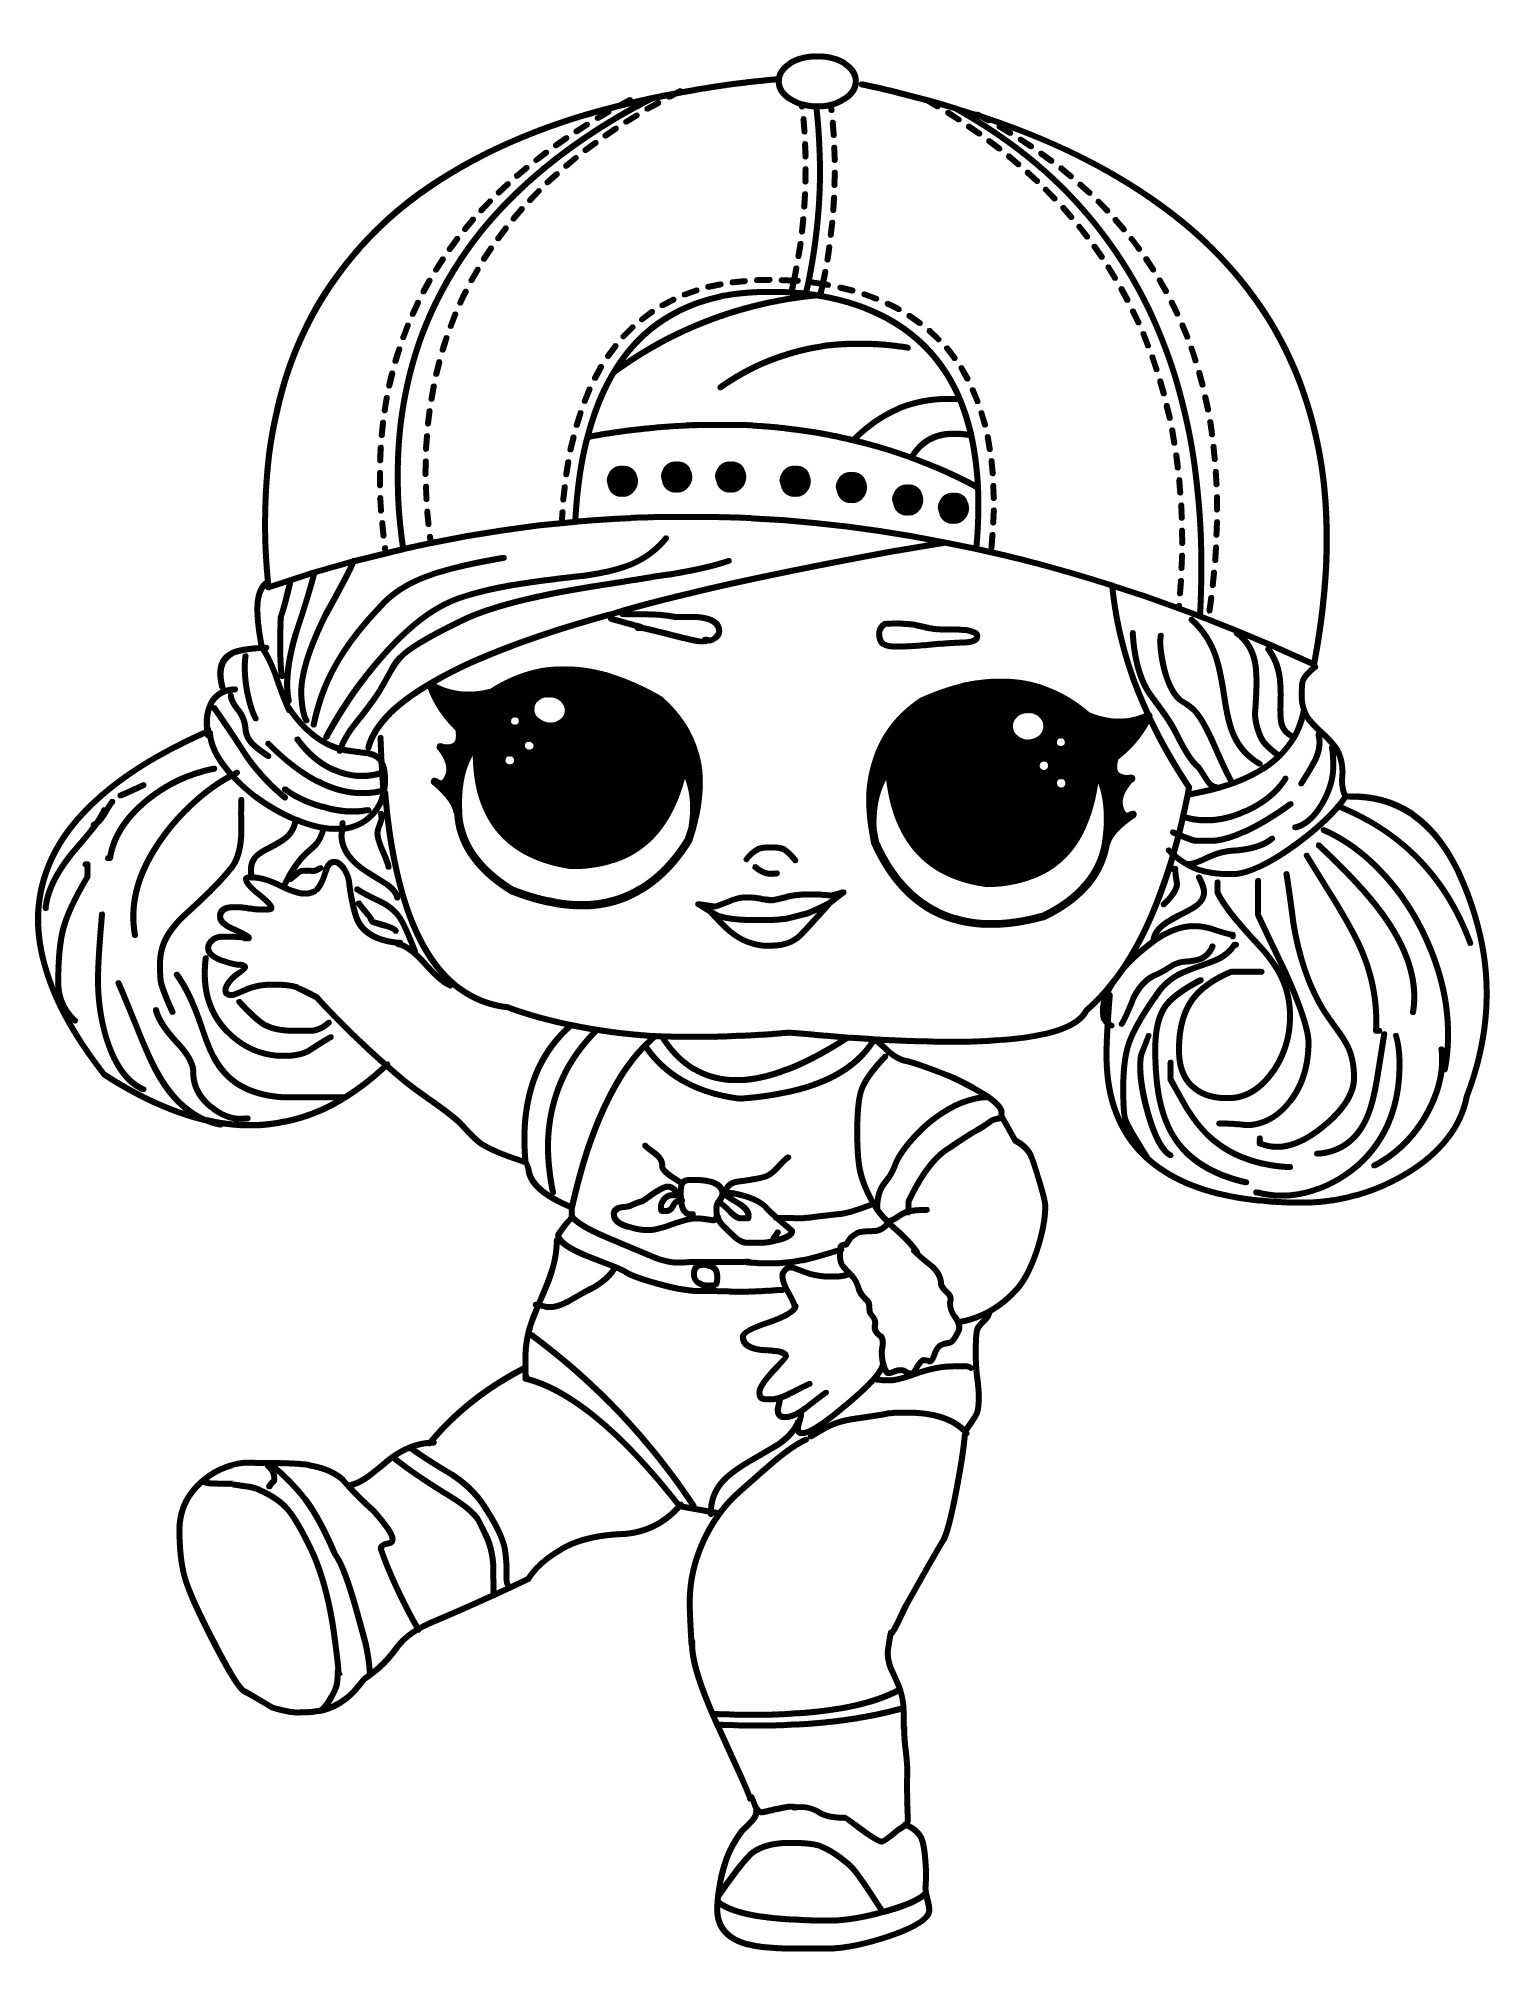 LOL Coloring Pages FREE Printable 60